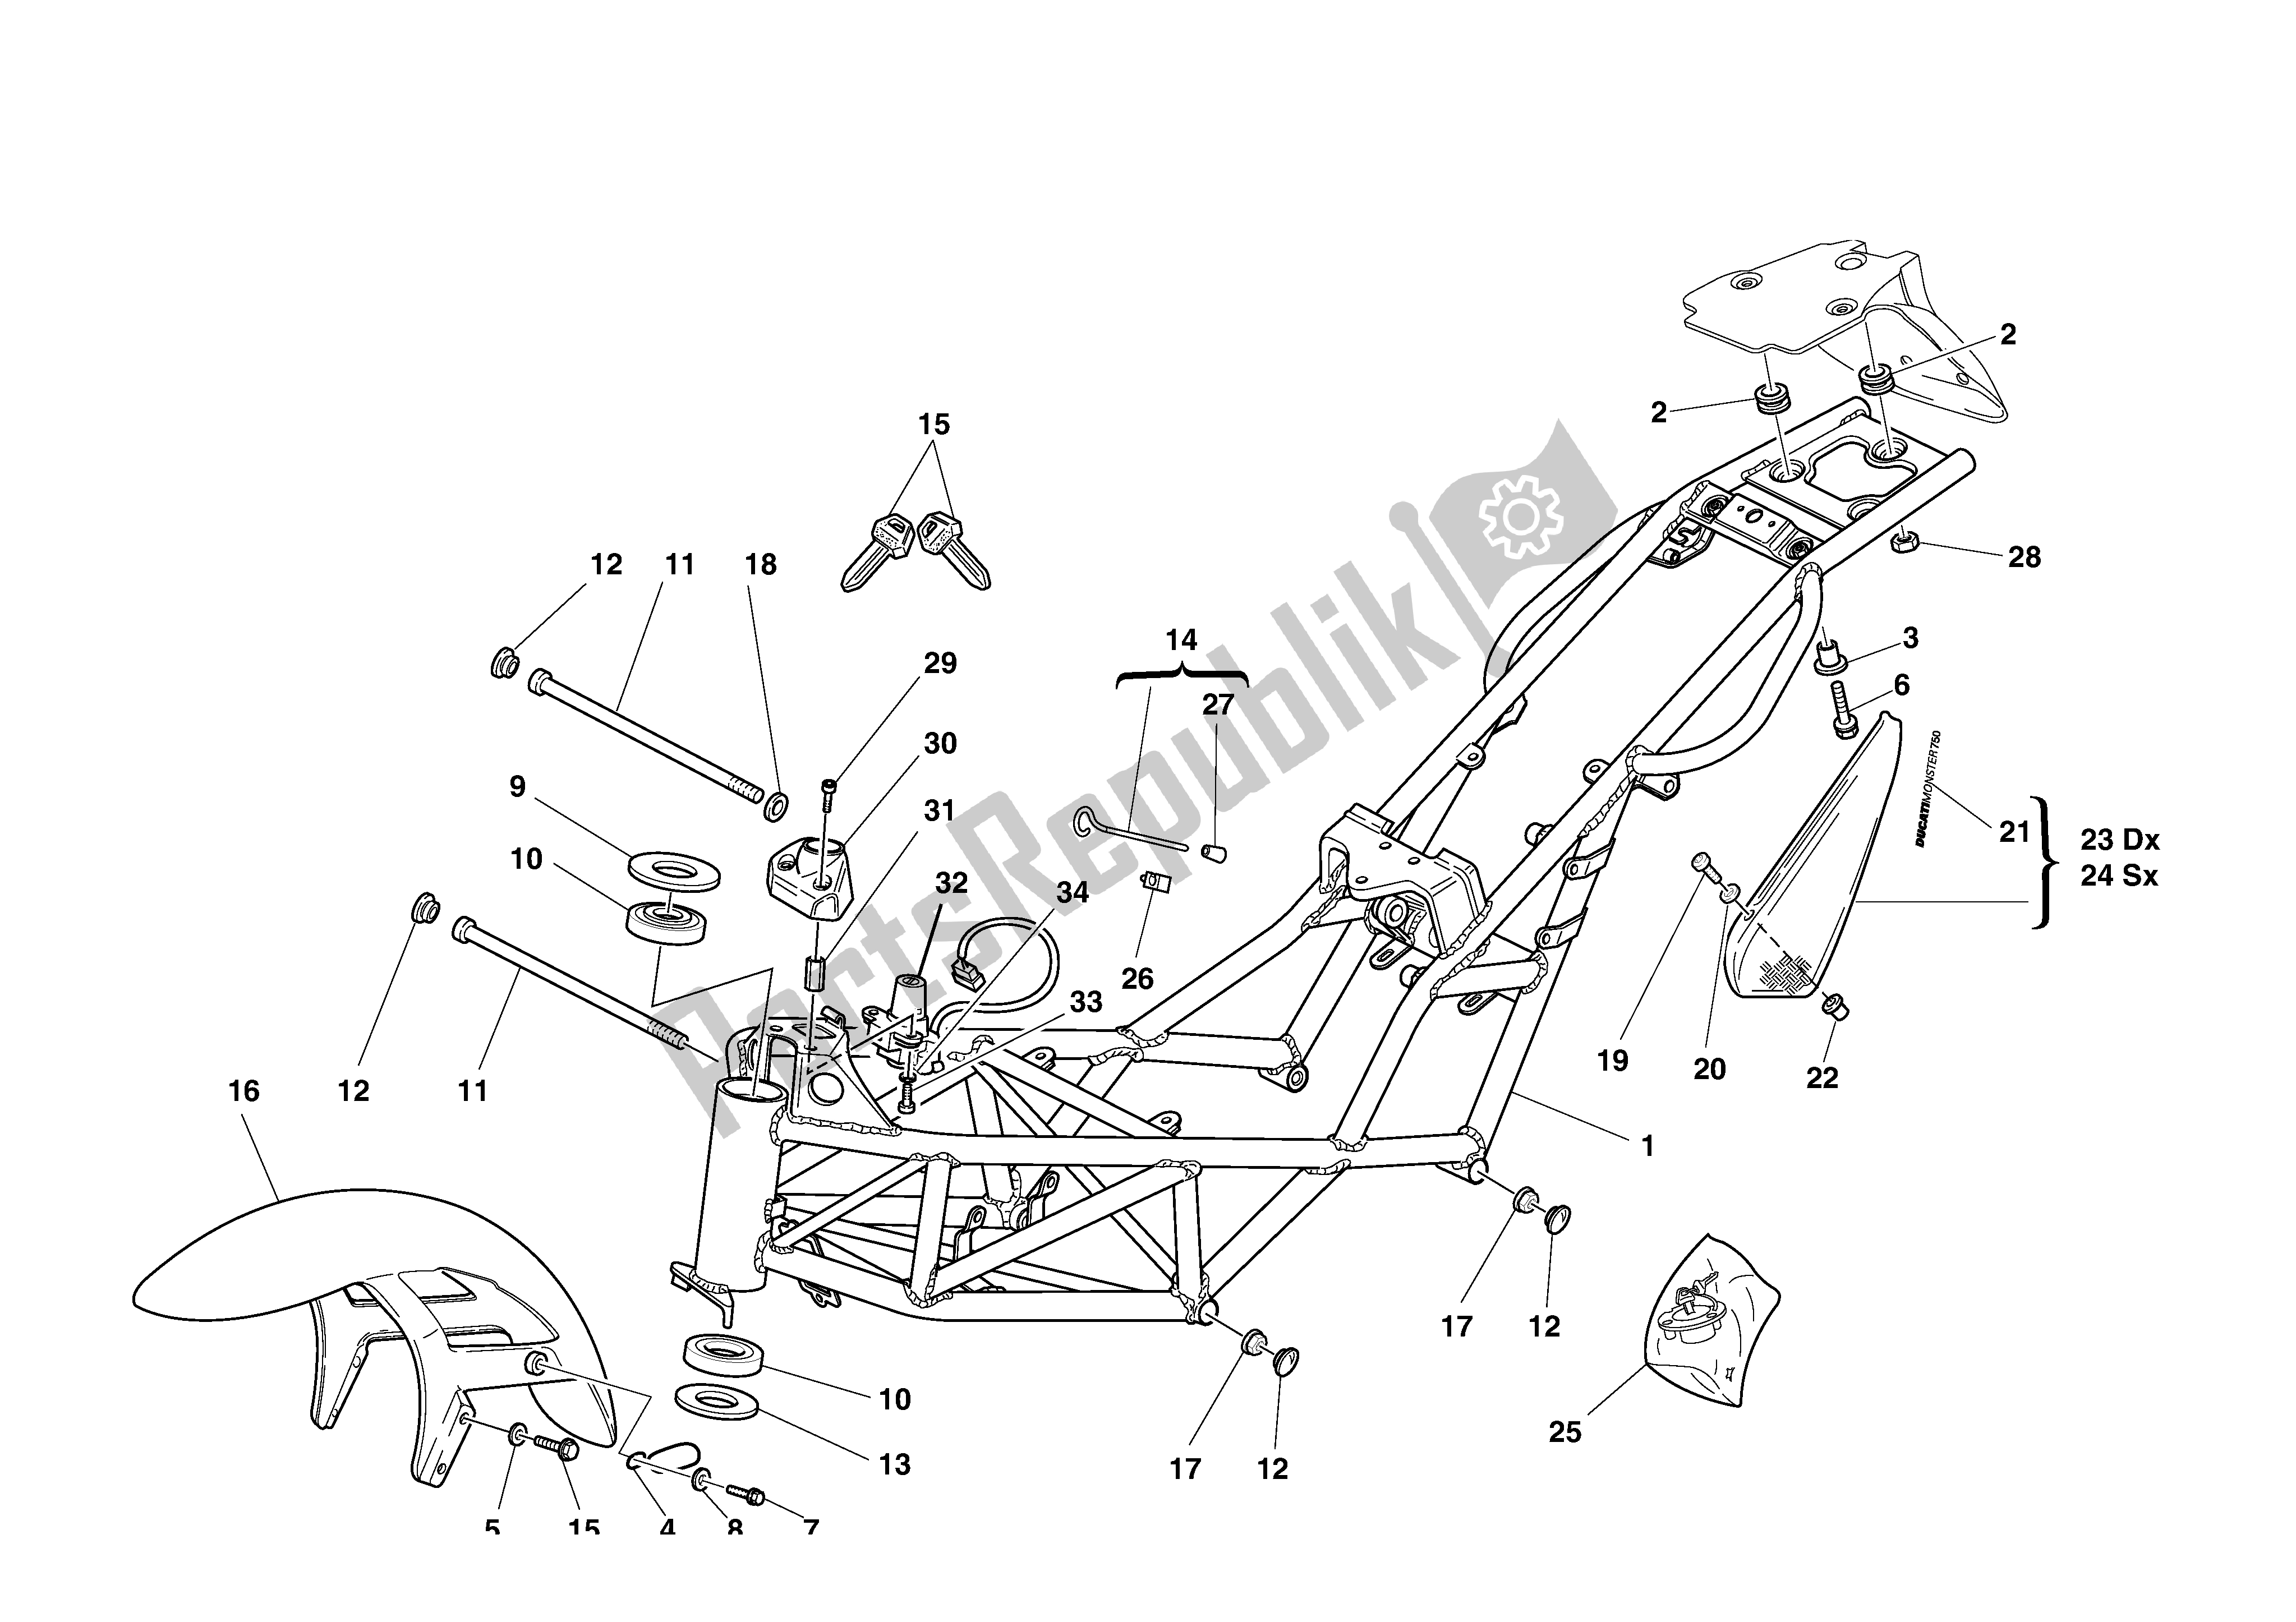 All parts for the Frame of the Ducati Monster 750 1996 - 2001